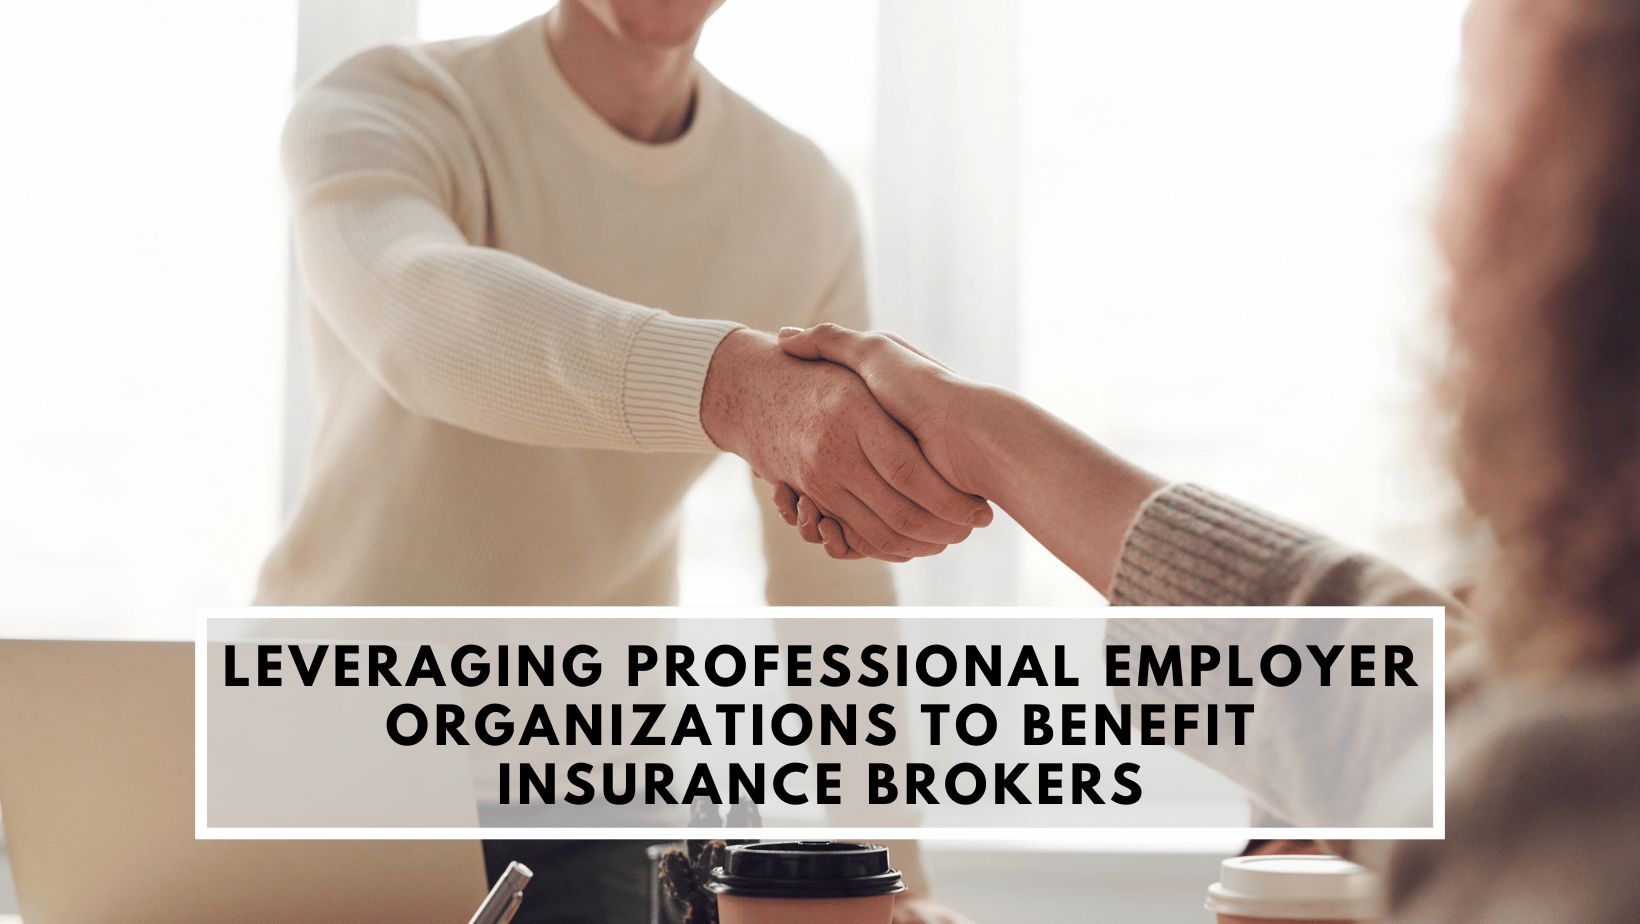 Leveraging Professional Employer Organizations to Benefit Insurance Brokers